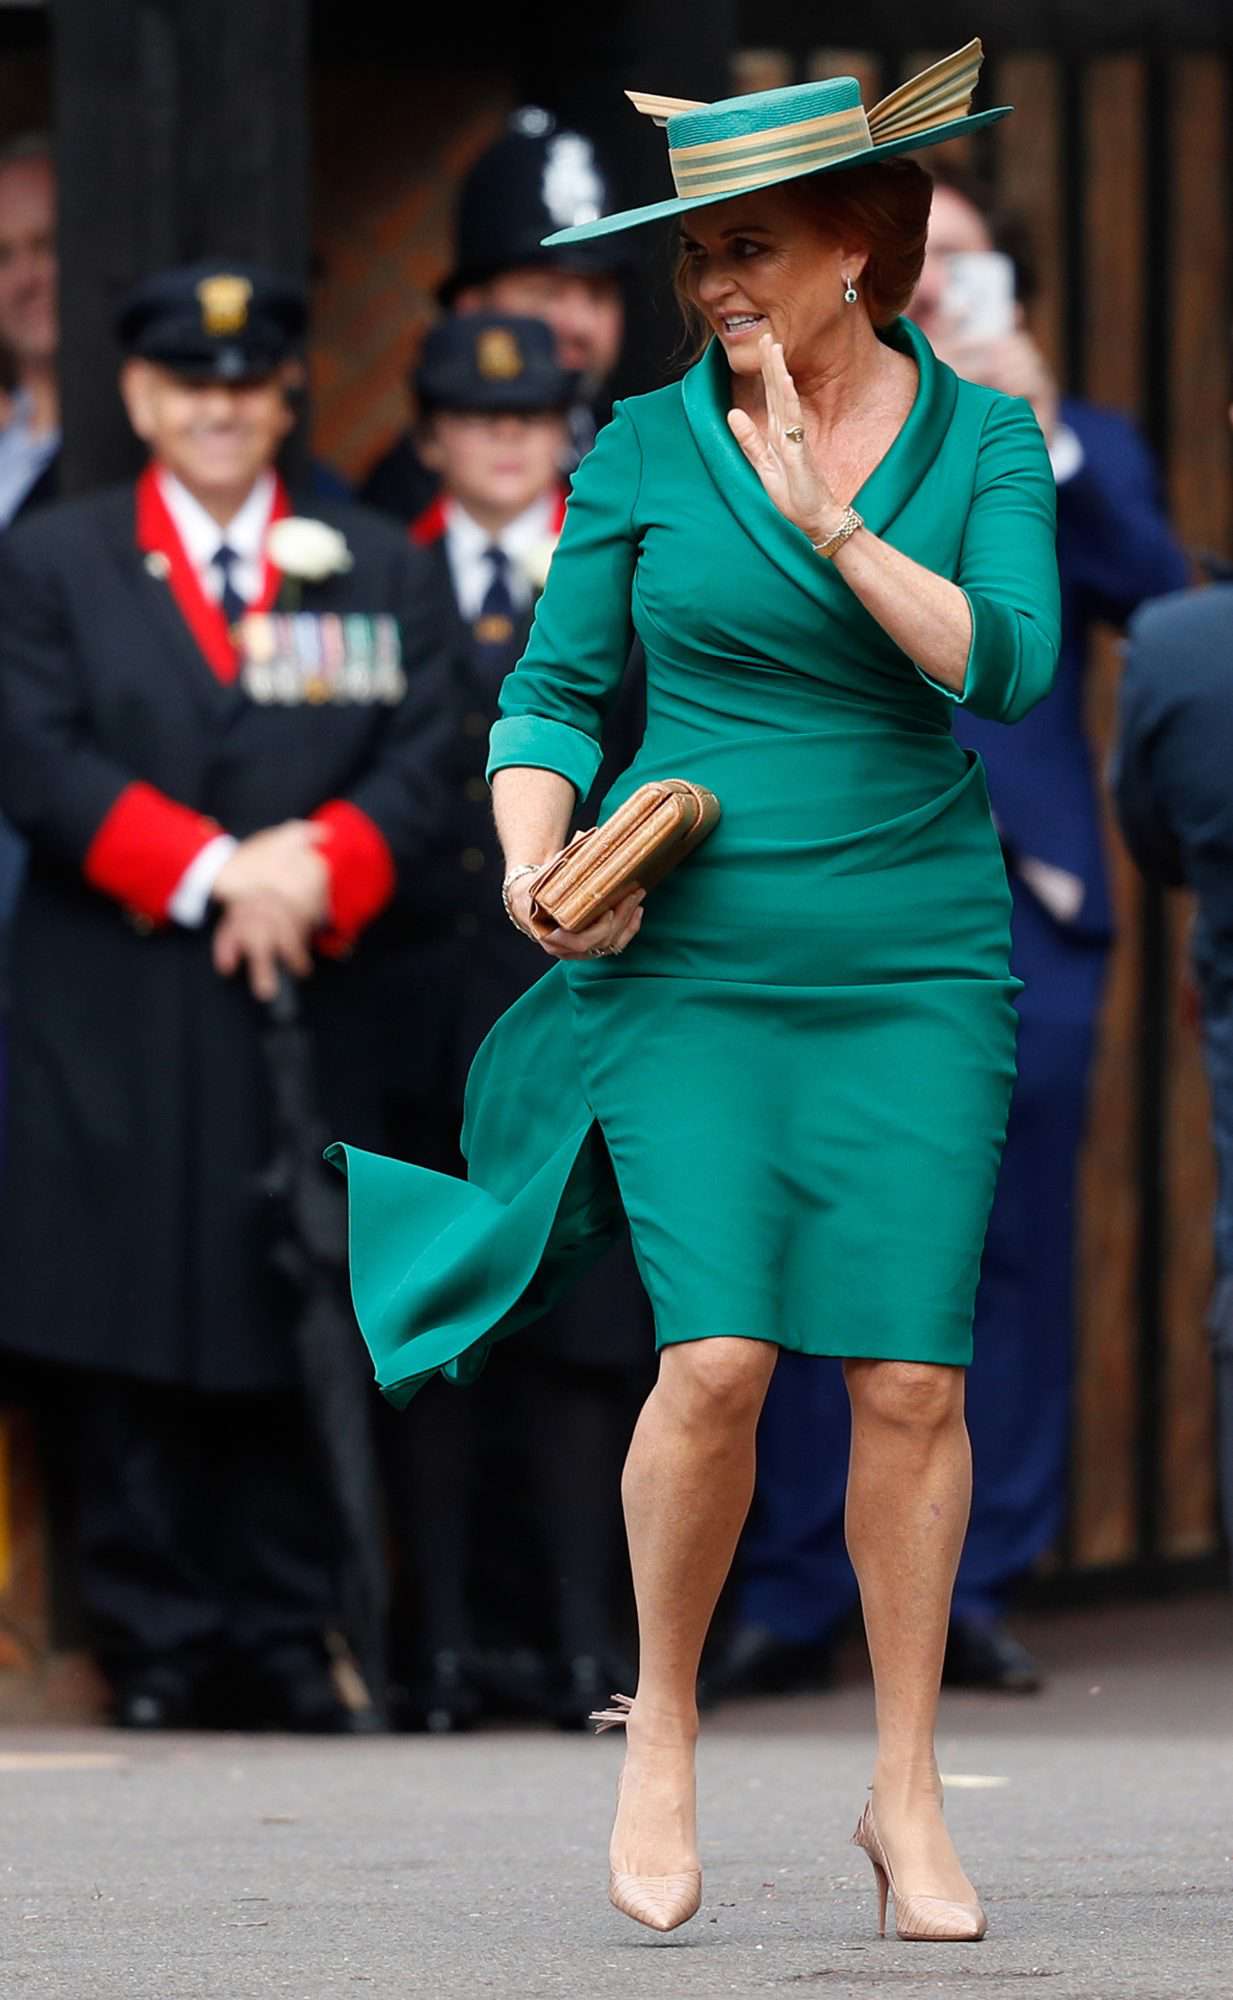 sarah ferguson the duchess of york arrives at the wedding of her daughter, princess eugenie